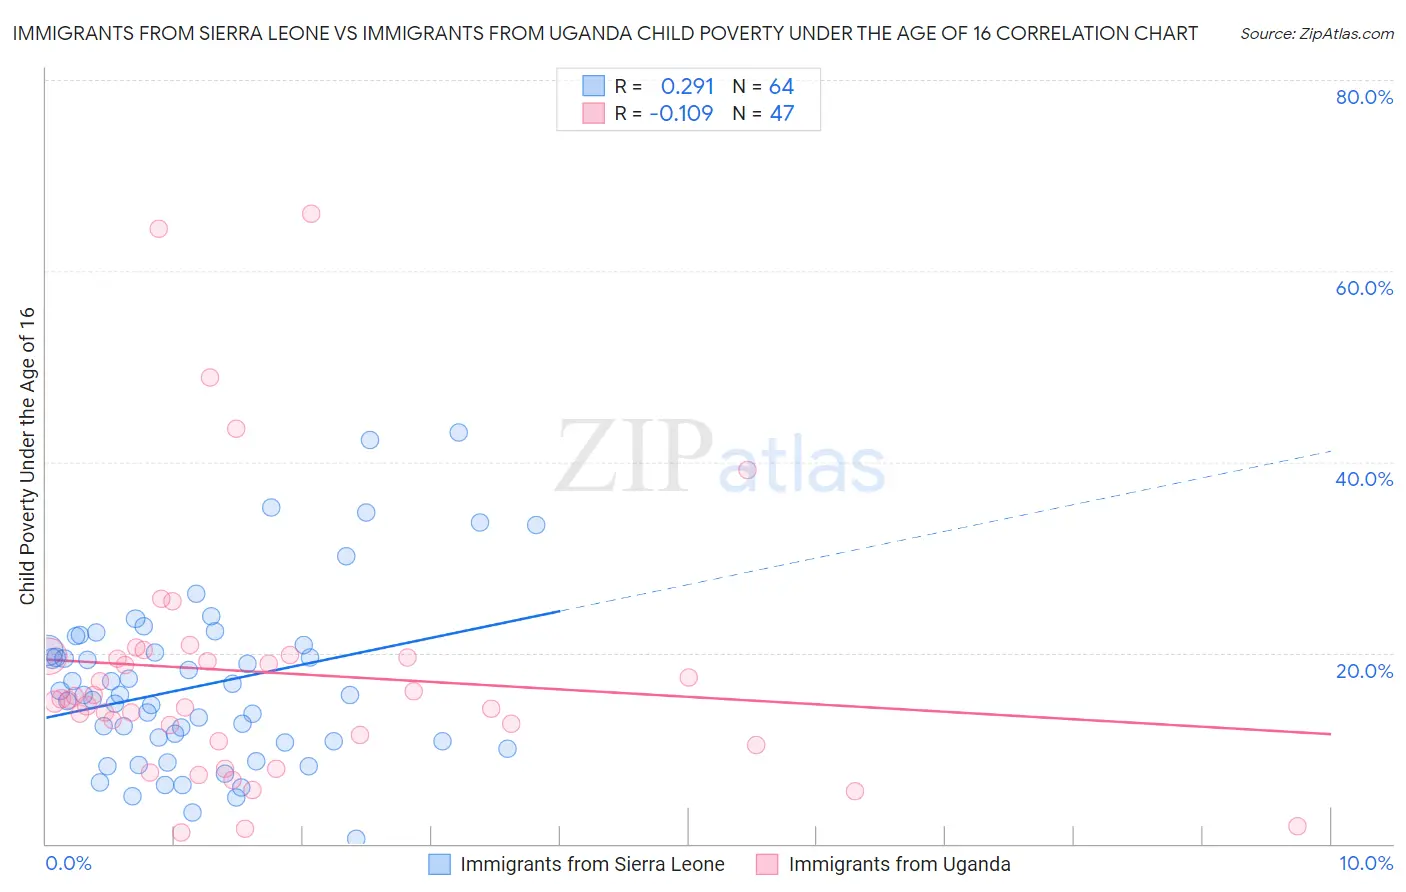 Immigrants from Sierra Leone vs Immigrants from Uganda Child Poverty Under the Age of 16